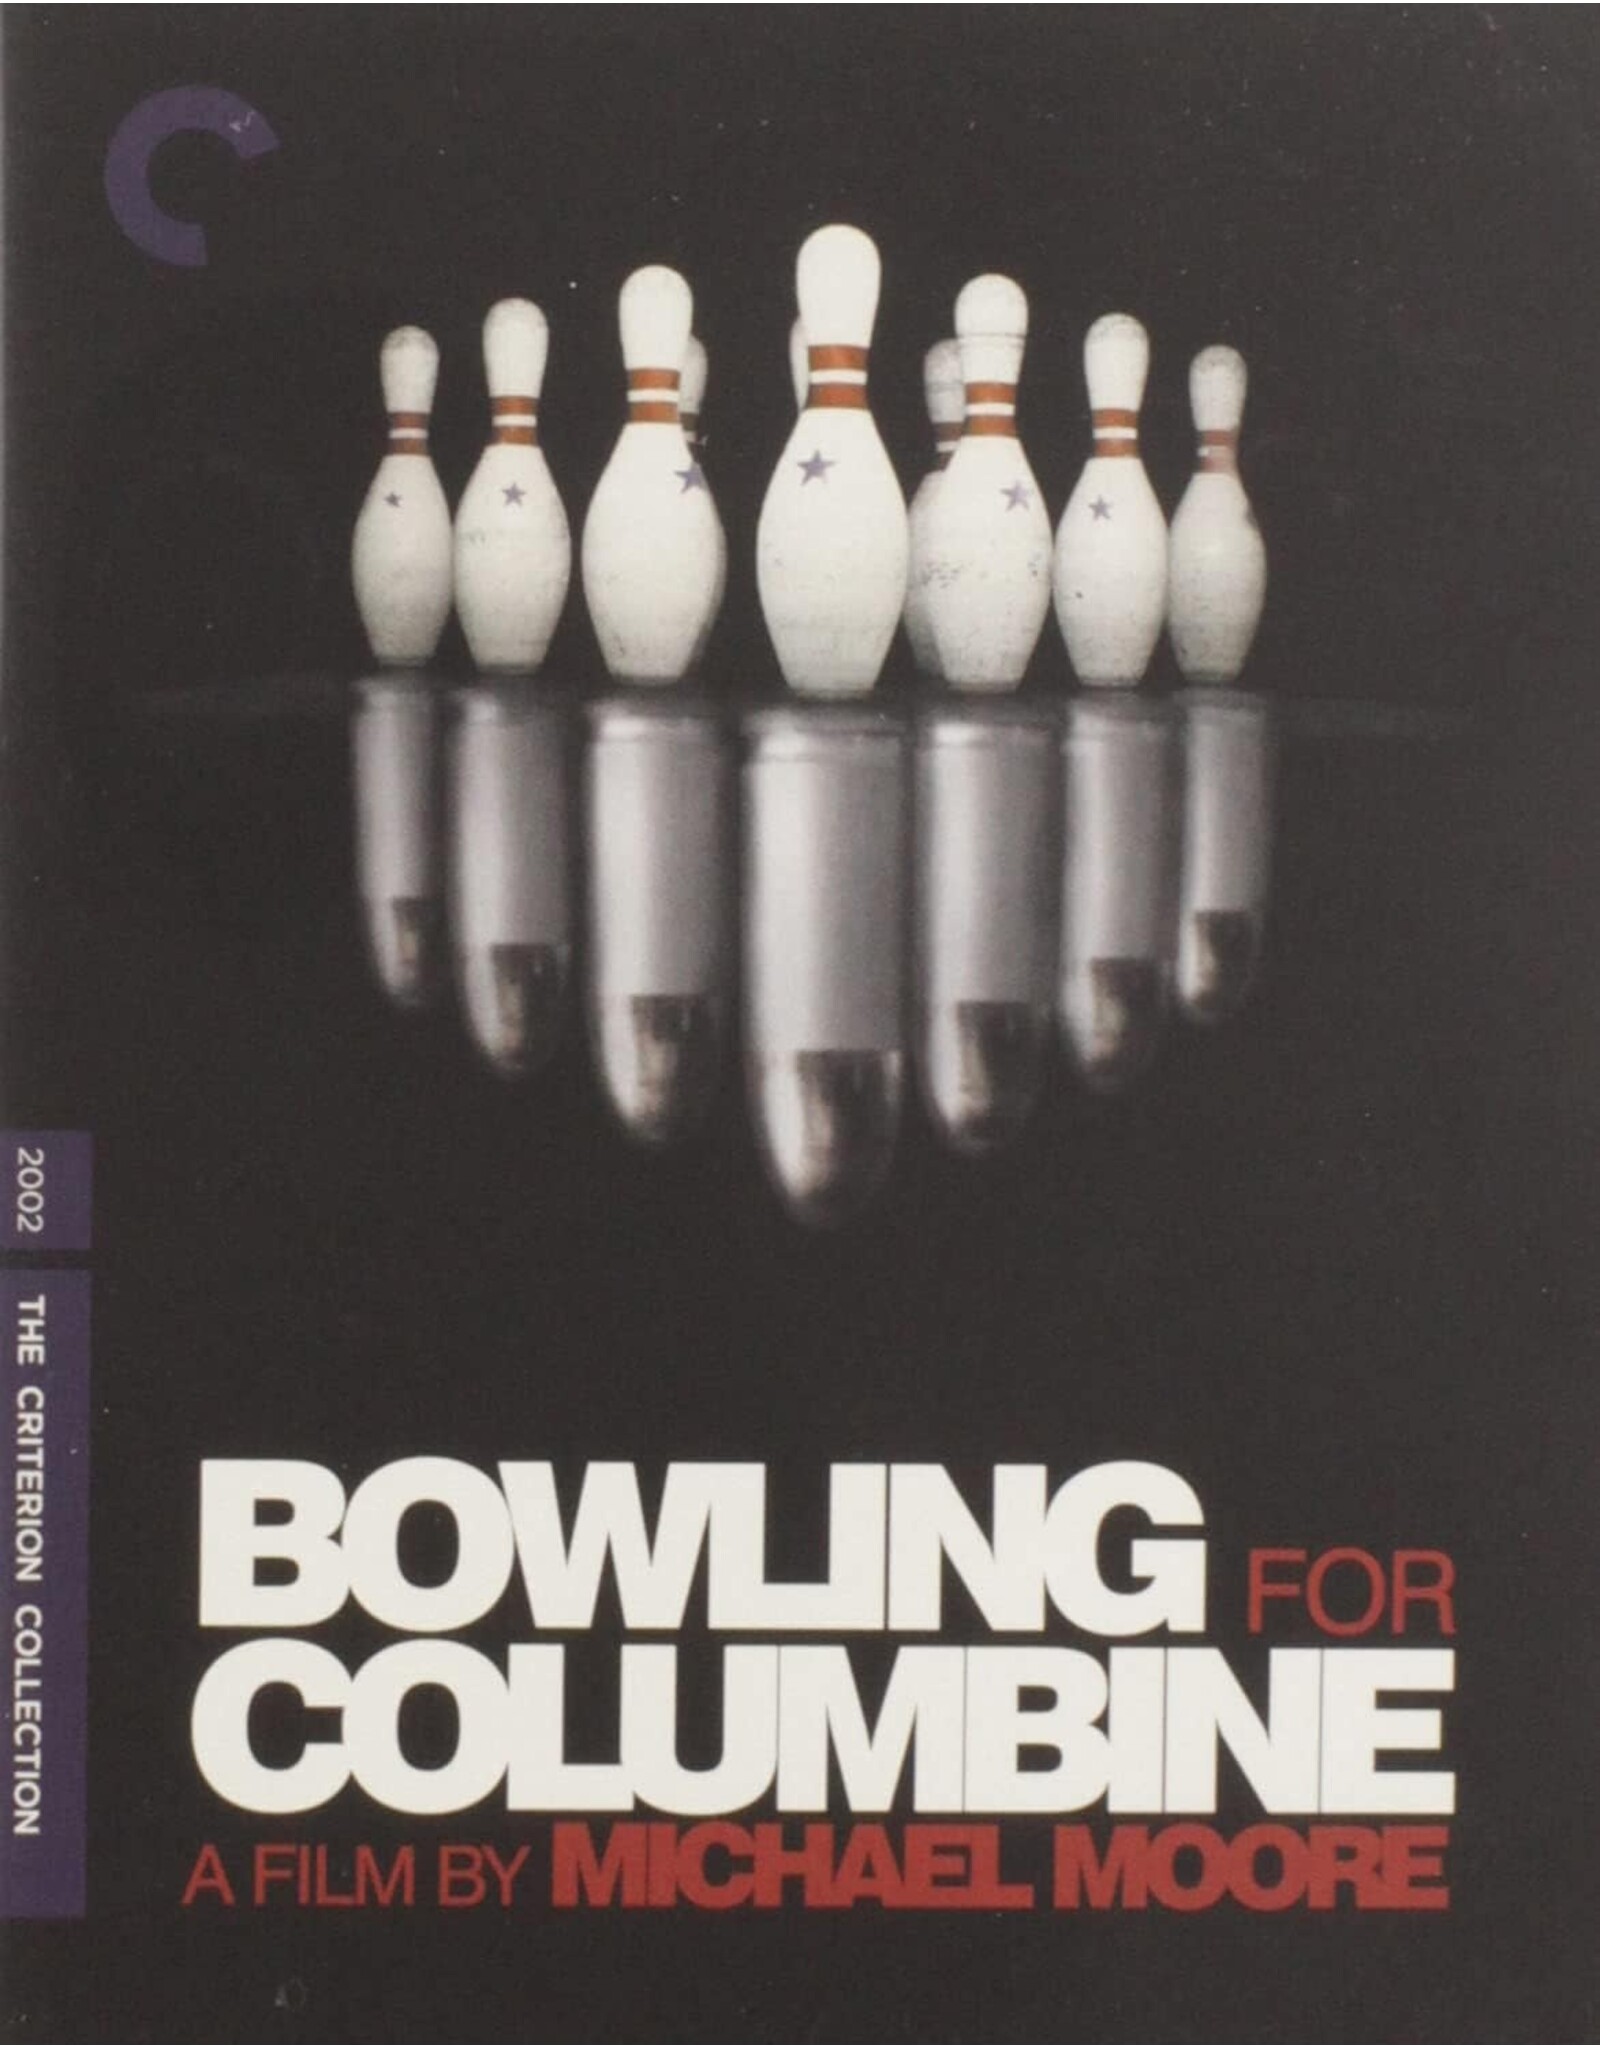 Criterion Collection Bowling for Columbine - Criterion Collection (Brand New)